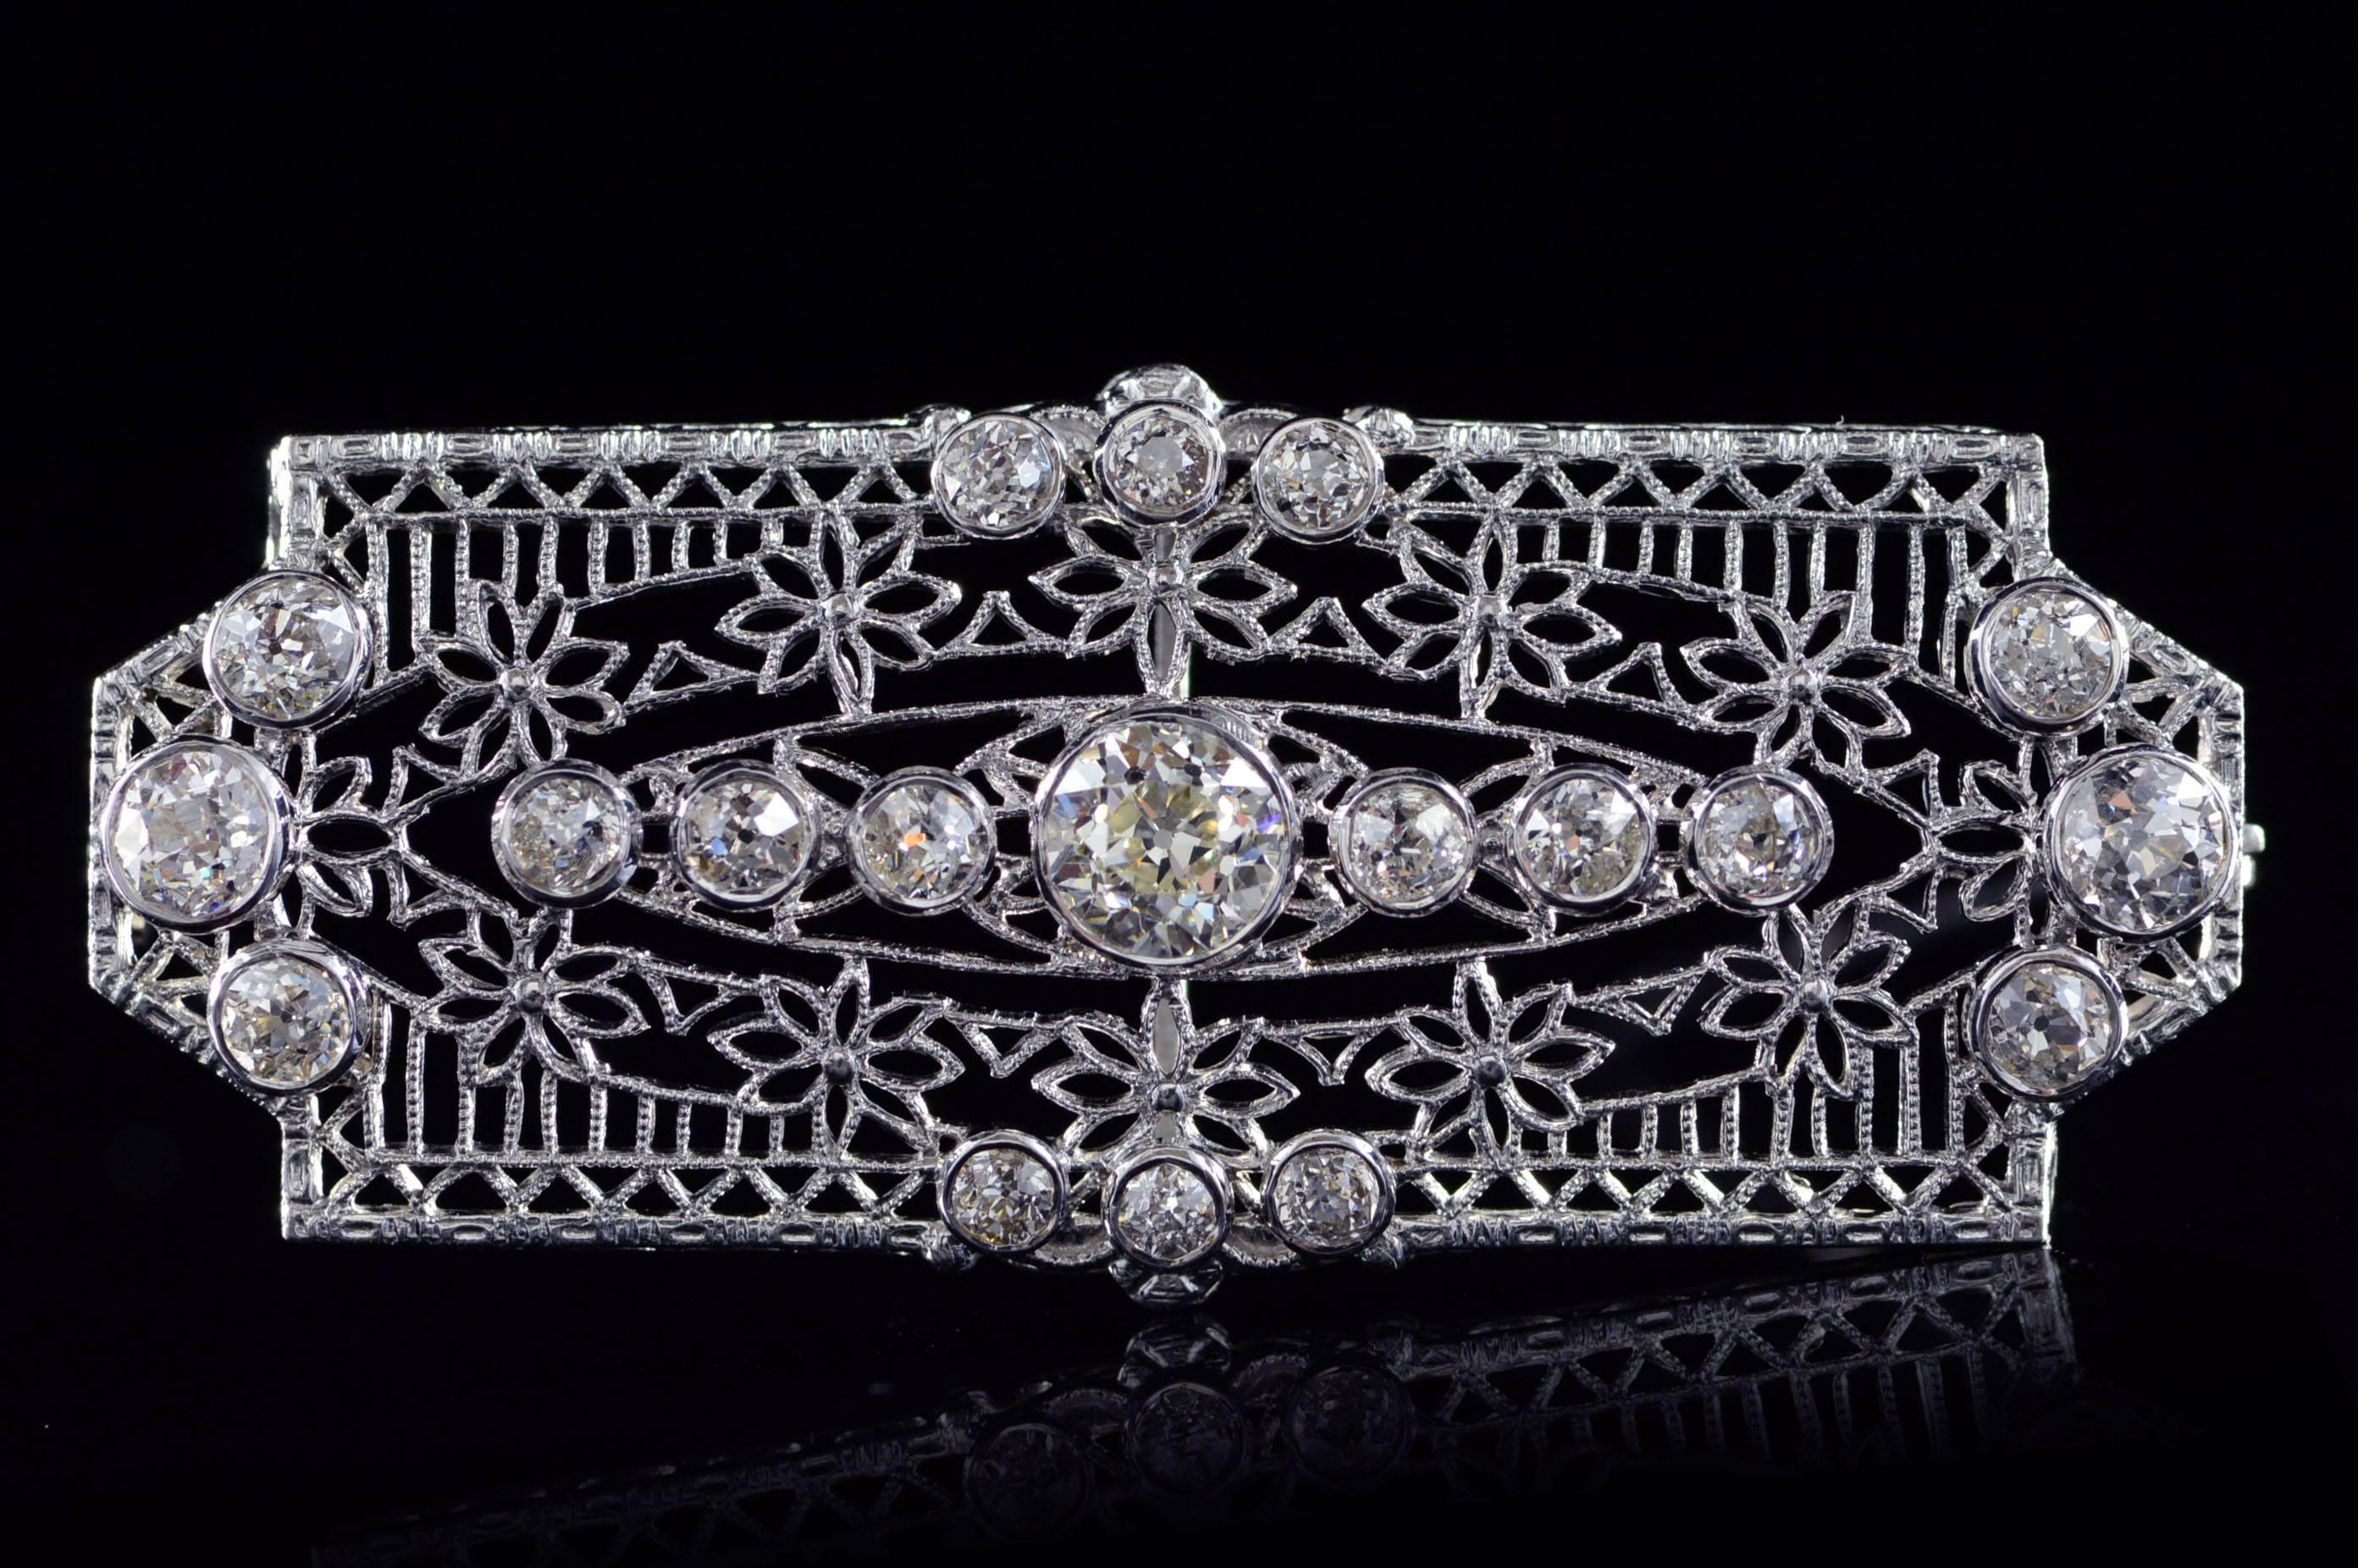 

·Item: 14K Antique 1.68 Ctw Diamond Filigree Bar Pin/Brooch White Gold

1920s

·Composition: 14k Gold Marked/Tested

·Gem Stone: 19x Old Mine Cut Diamond=1.68Ctw G-H/SI-I

·Condition: Estate - Excellent

·Weight: 5.2g